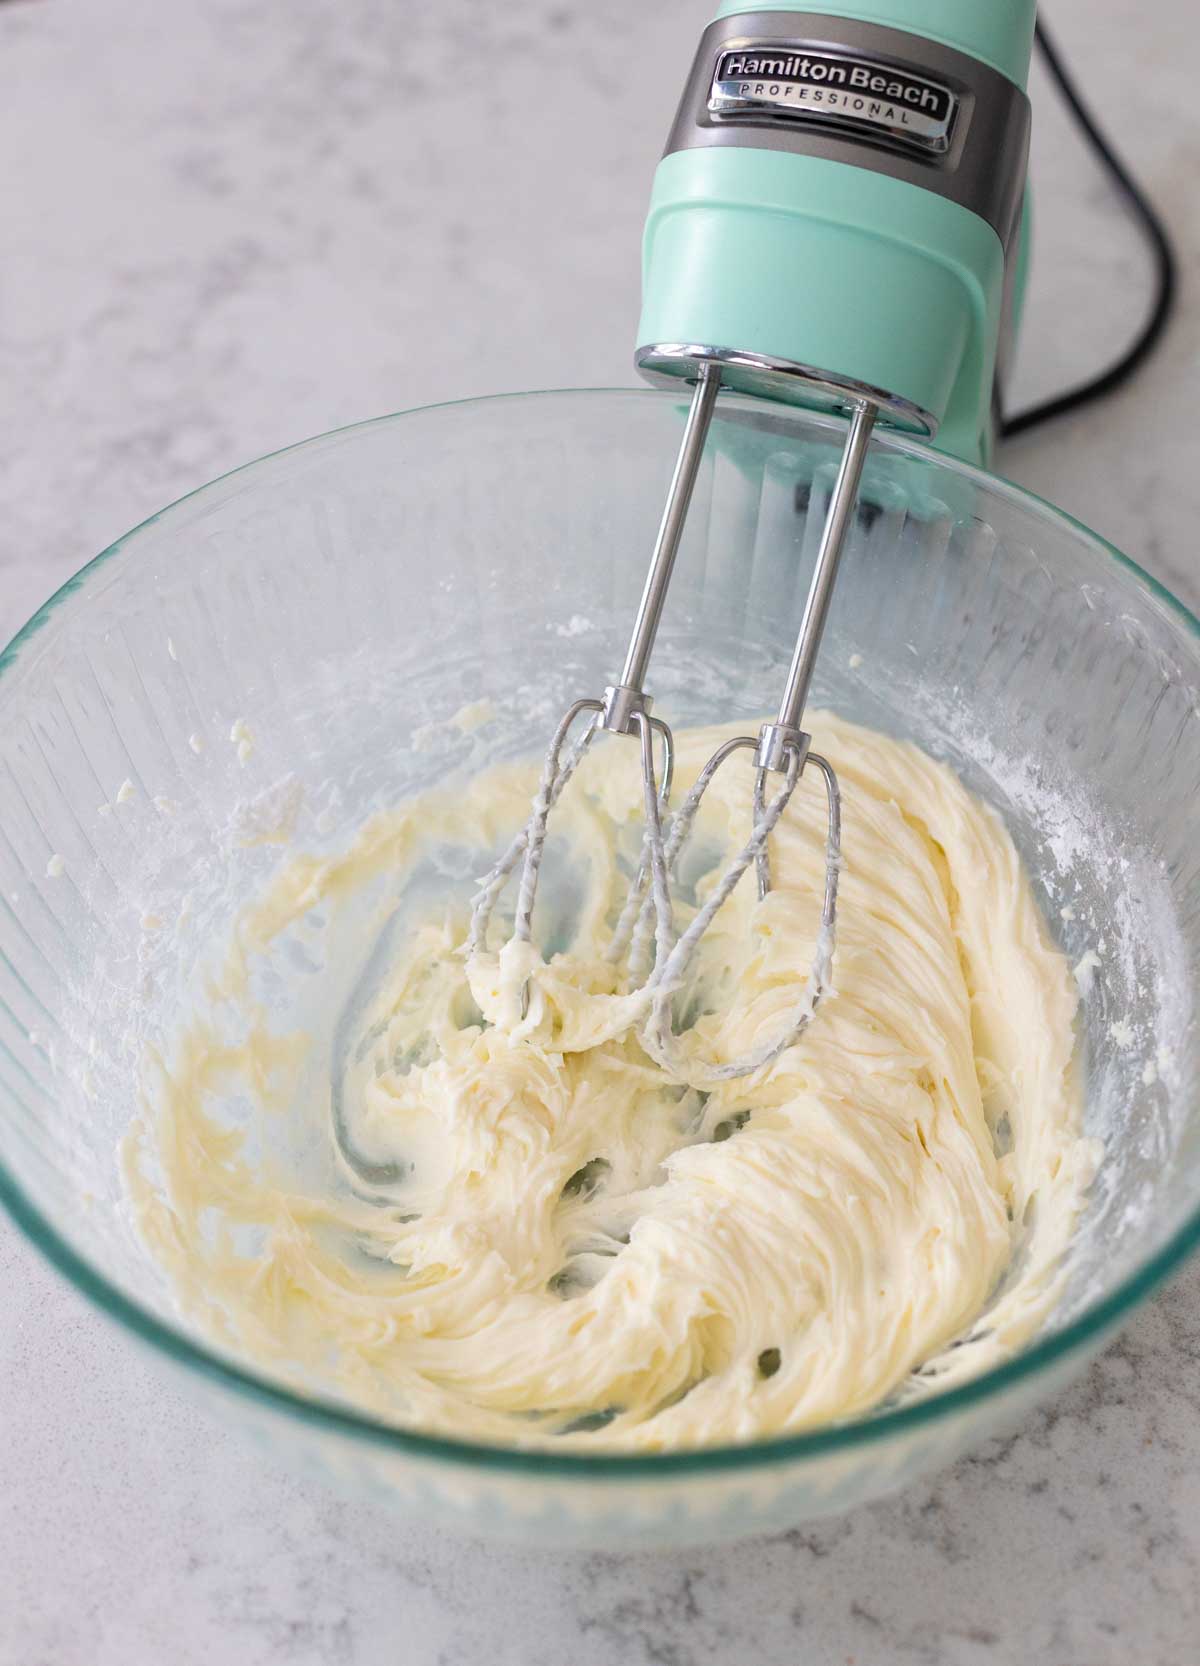 A hand mixer has whipped together the cream cheese and sugar.